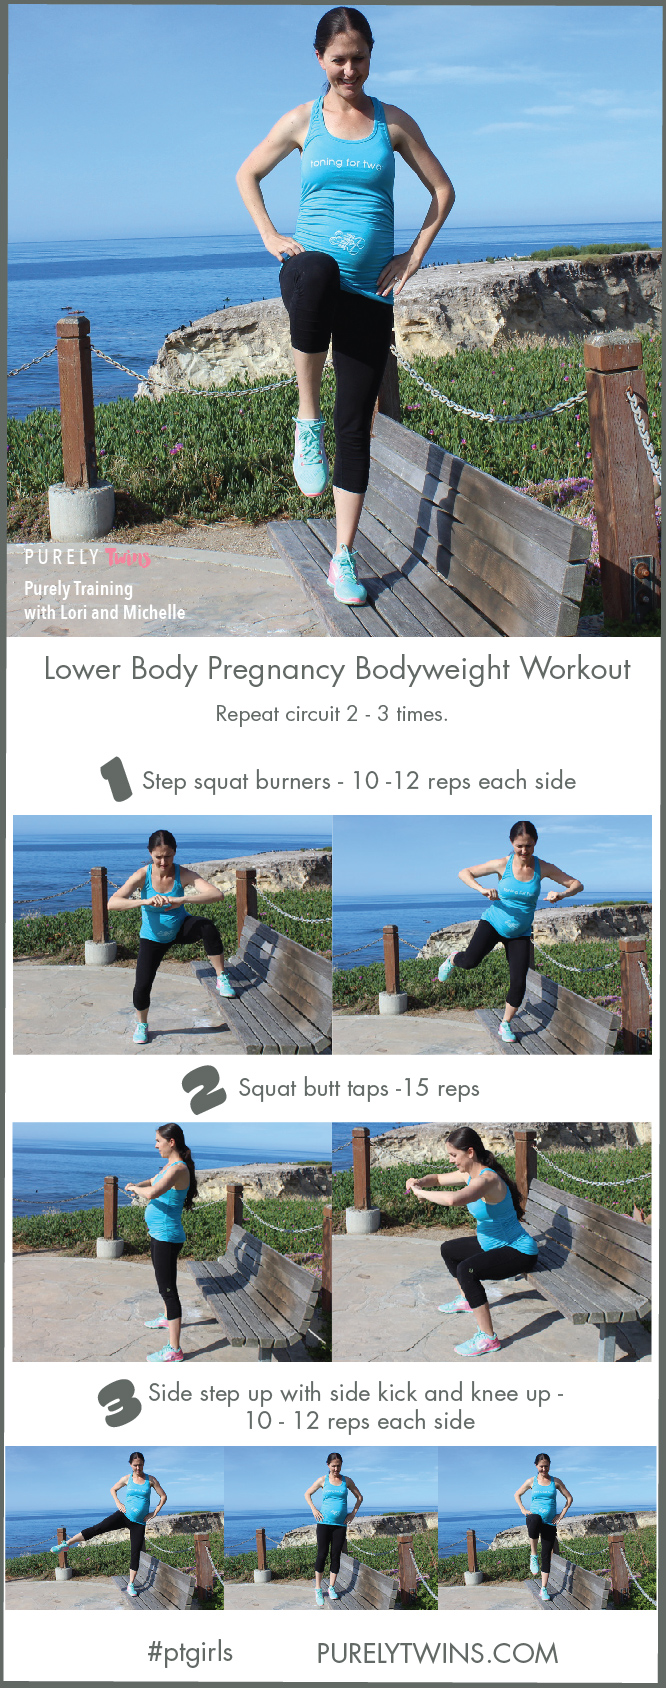 Lower body pregnancy safe bodyweight workout to do at home. This leg workout will keep your legs and butt strong as your body changes through pregnancy.